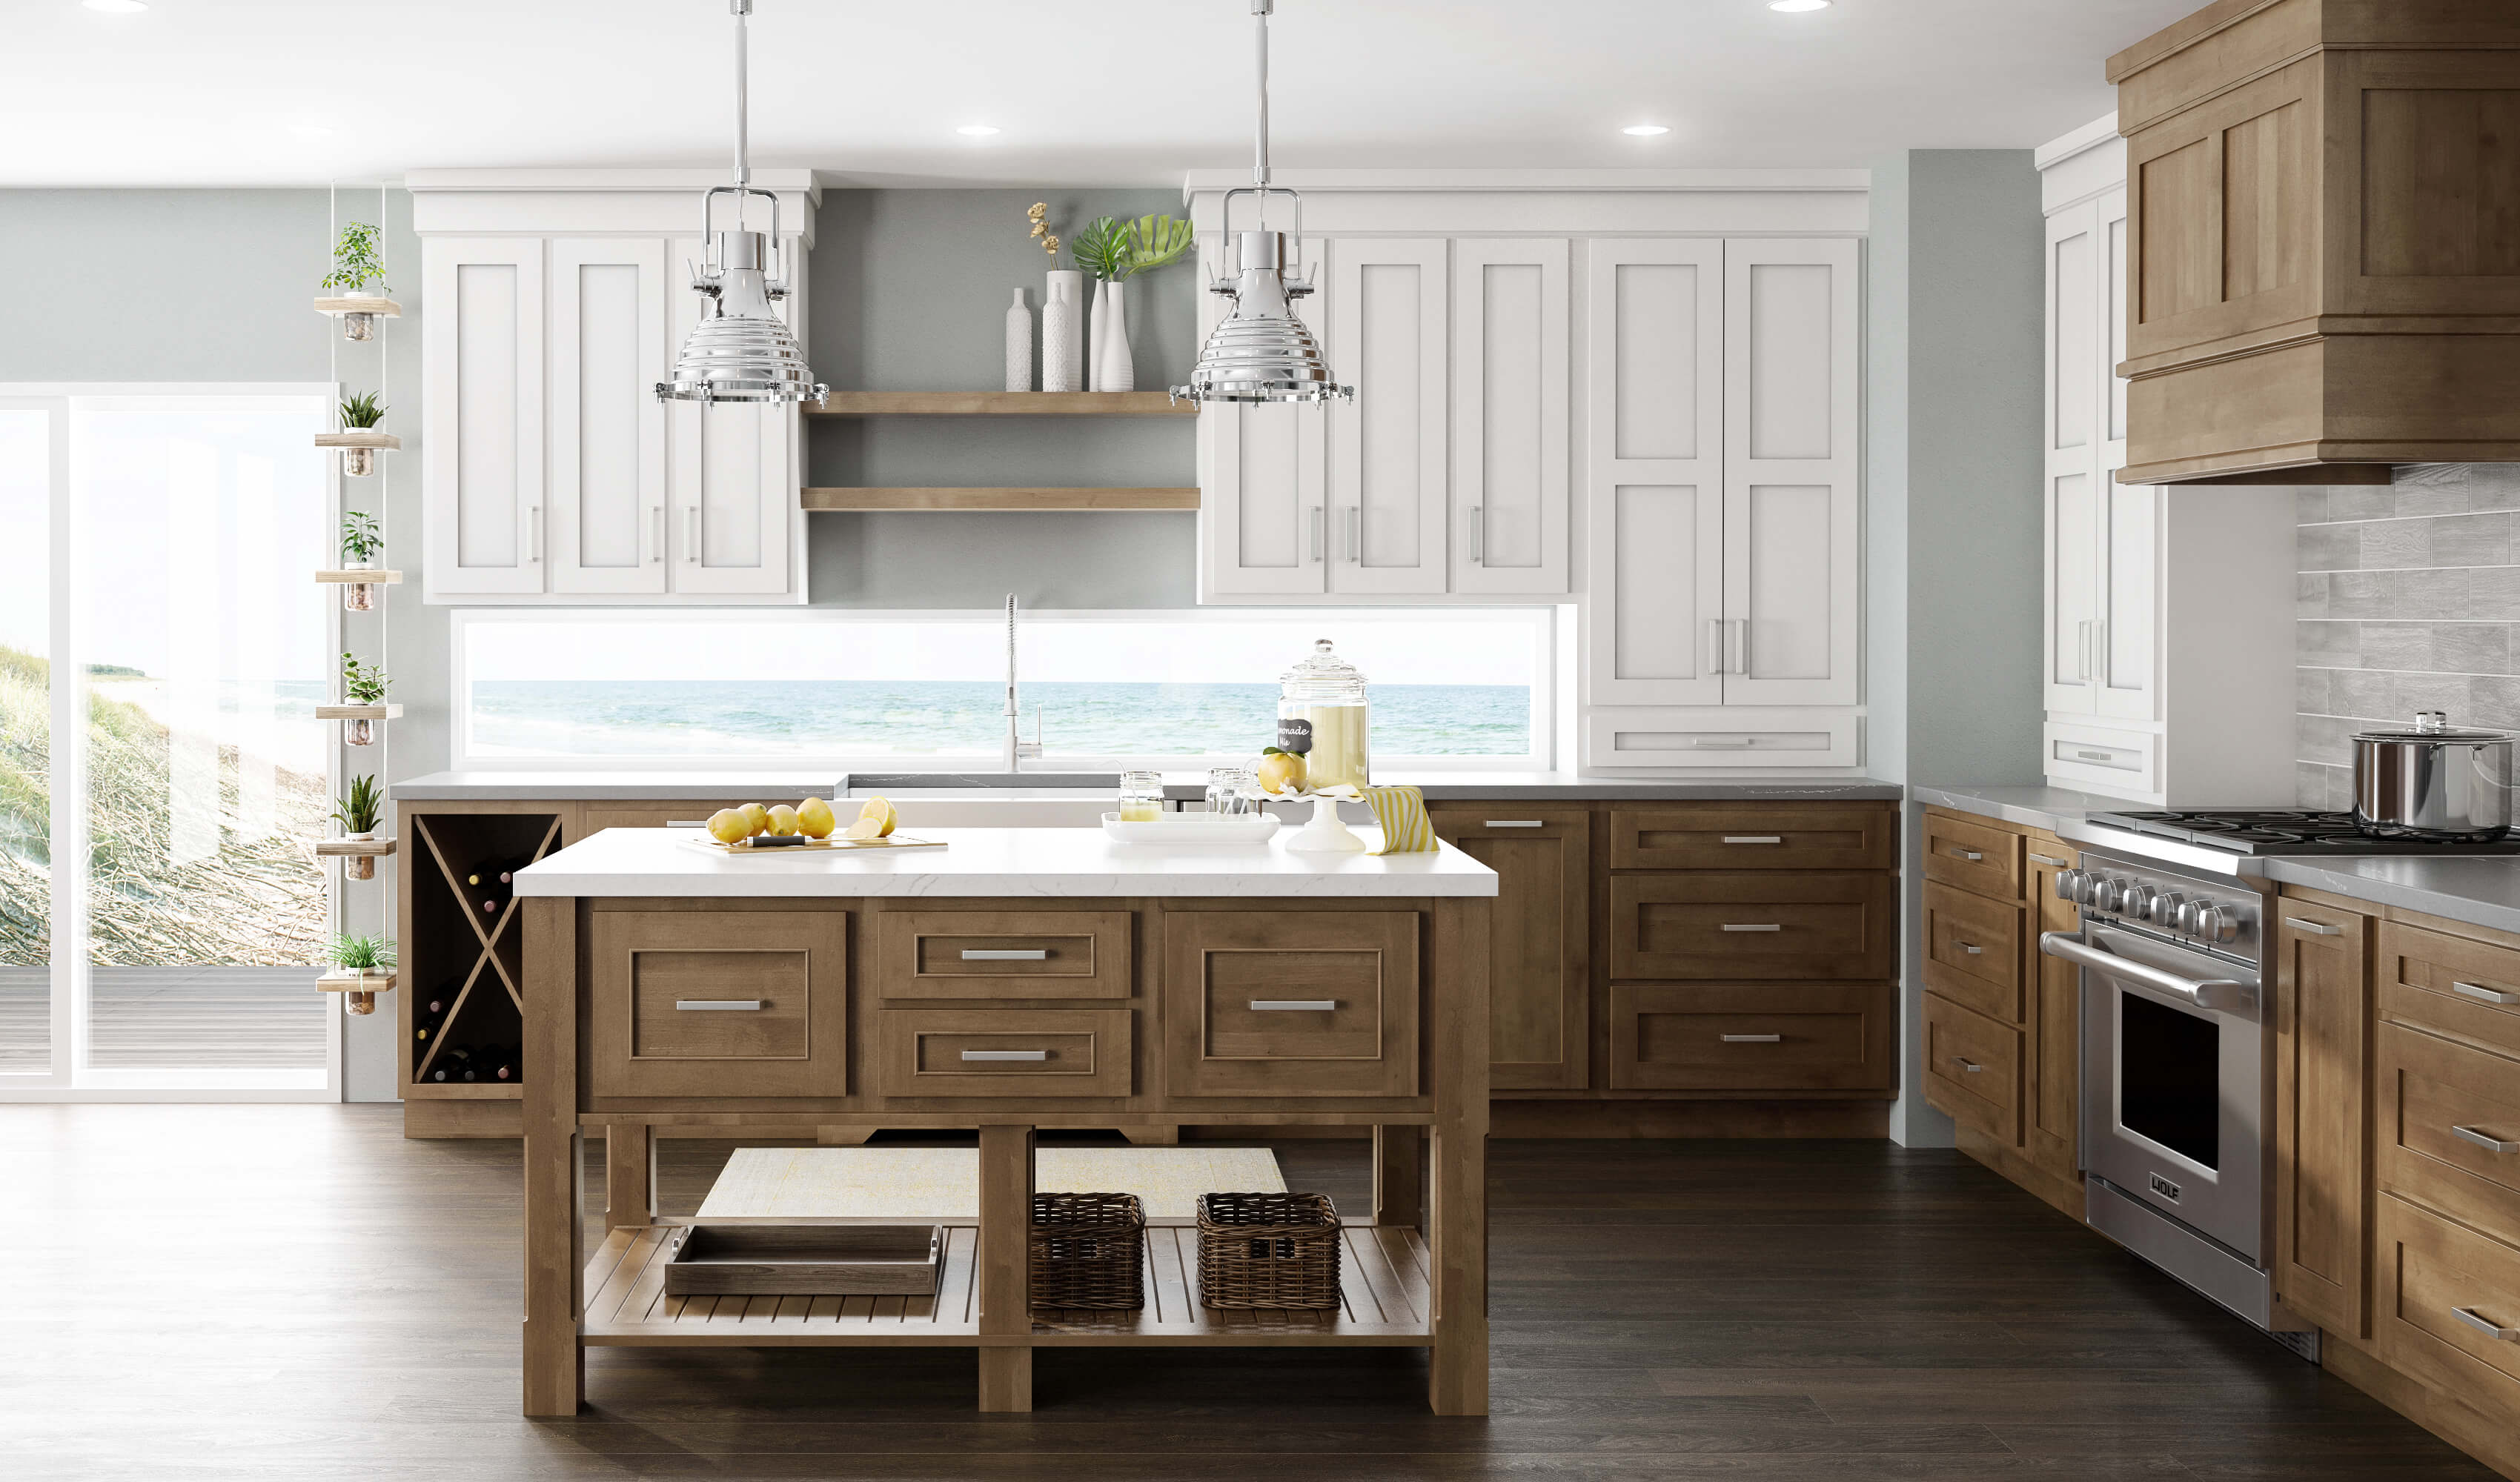 A beach style kitchen with two tone cabinets from Dura Supreme with traditional overlay cabinet doors. A backsplash window looks out to the beachy coastal view. A light stained Knotty Alder kitchen island as a table like design and a large floor shelf for storing decor, serveware and other kitchen supplies.